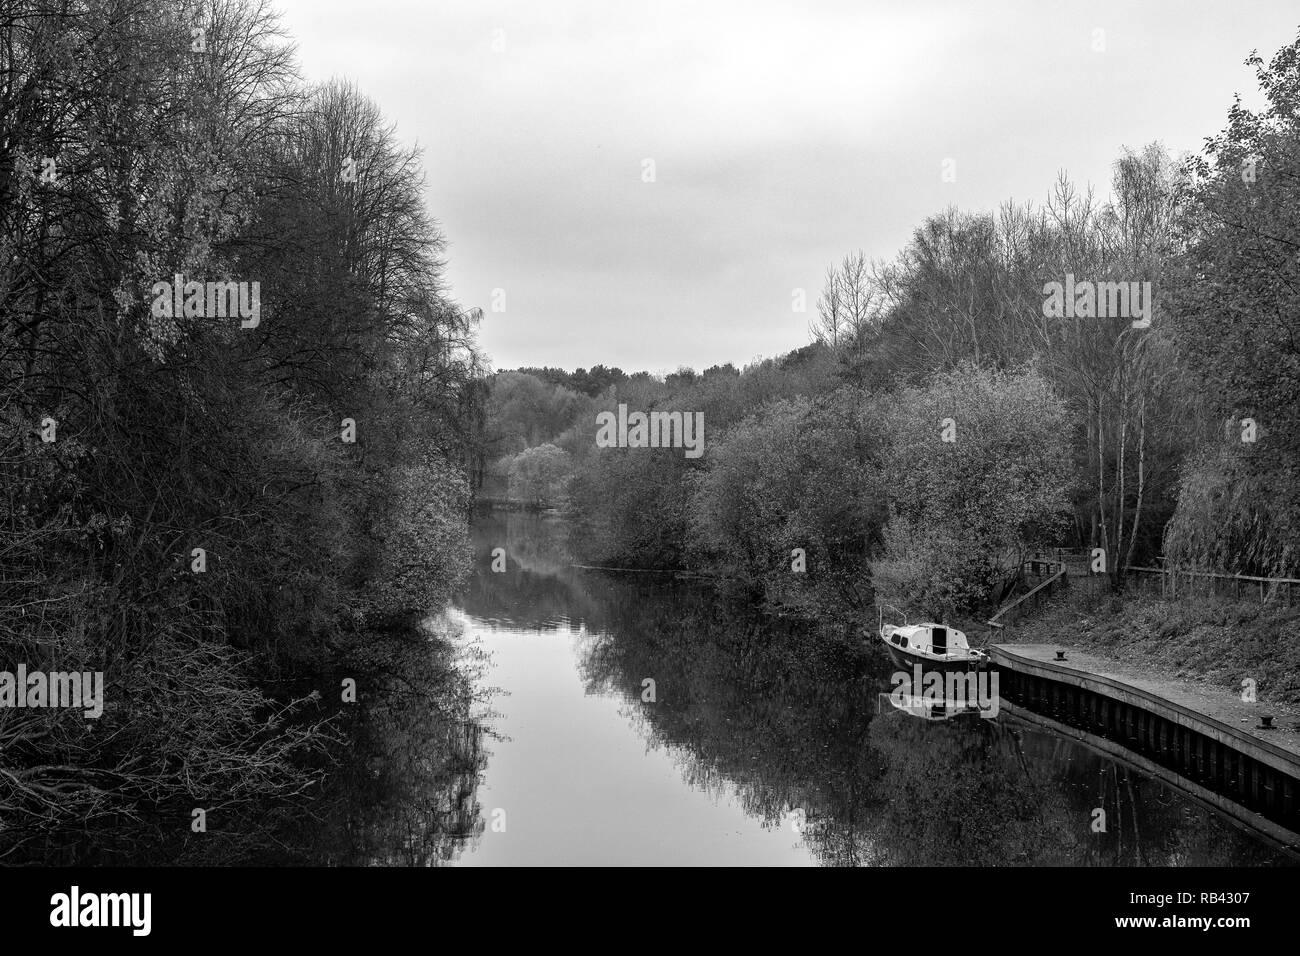 Abandoned boat in black & white on the river Weaver in Winsford Cheshire UK Stock Photo